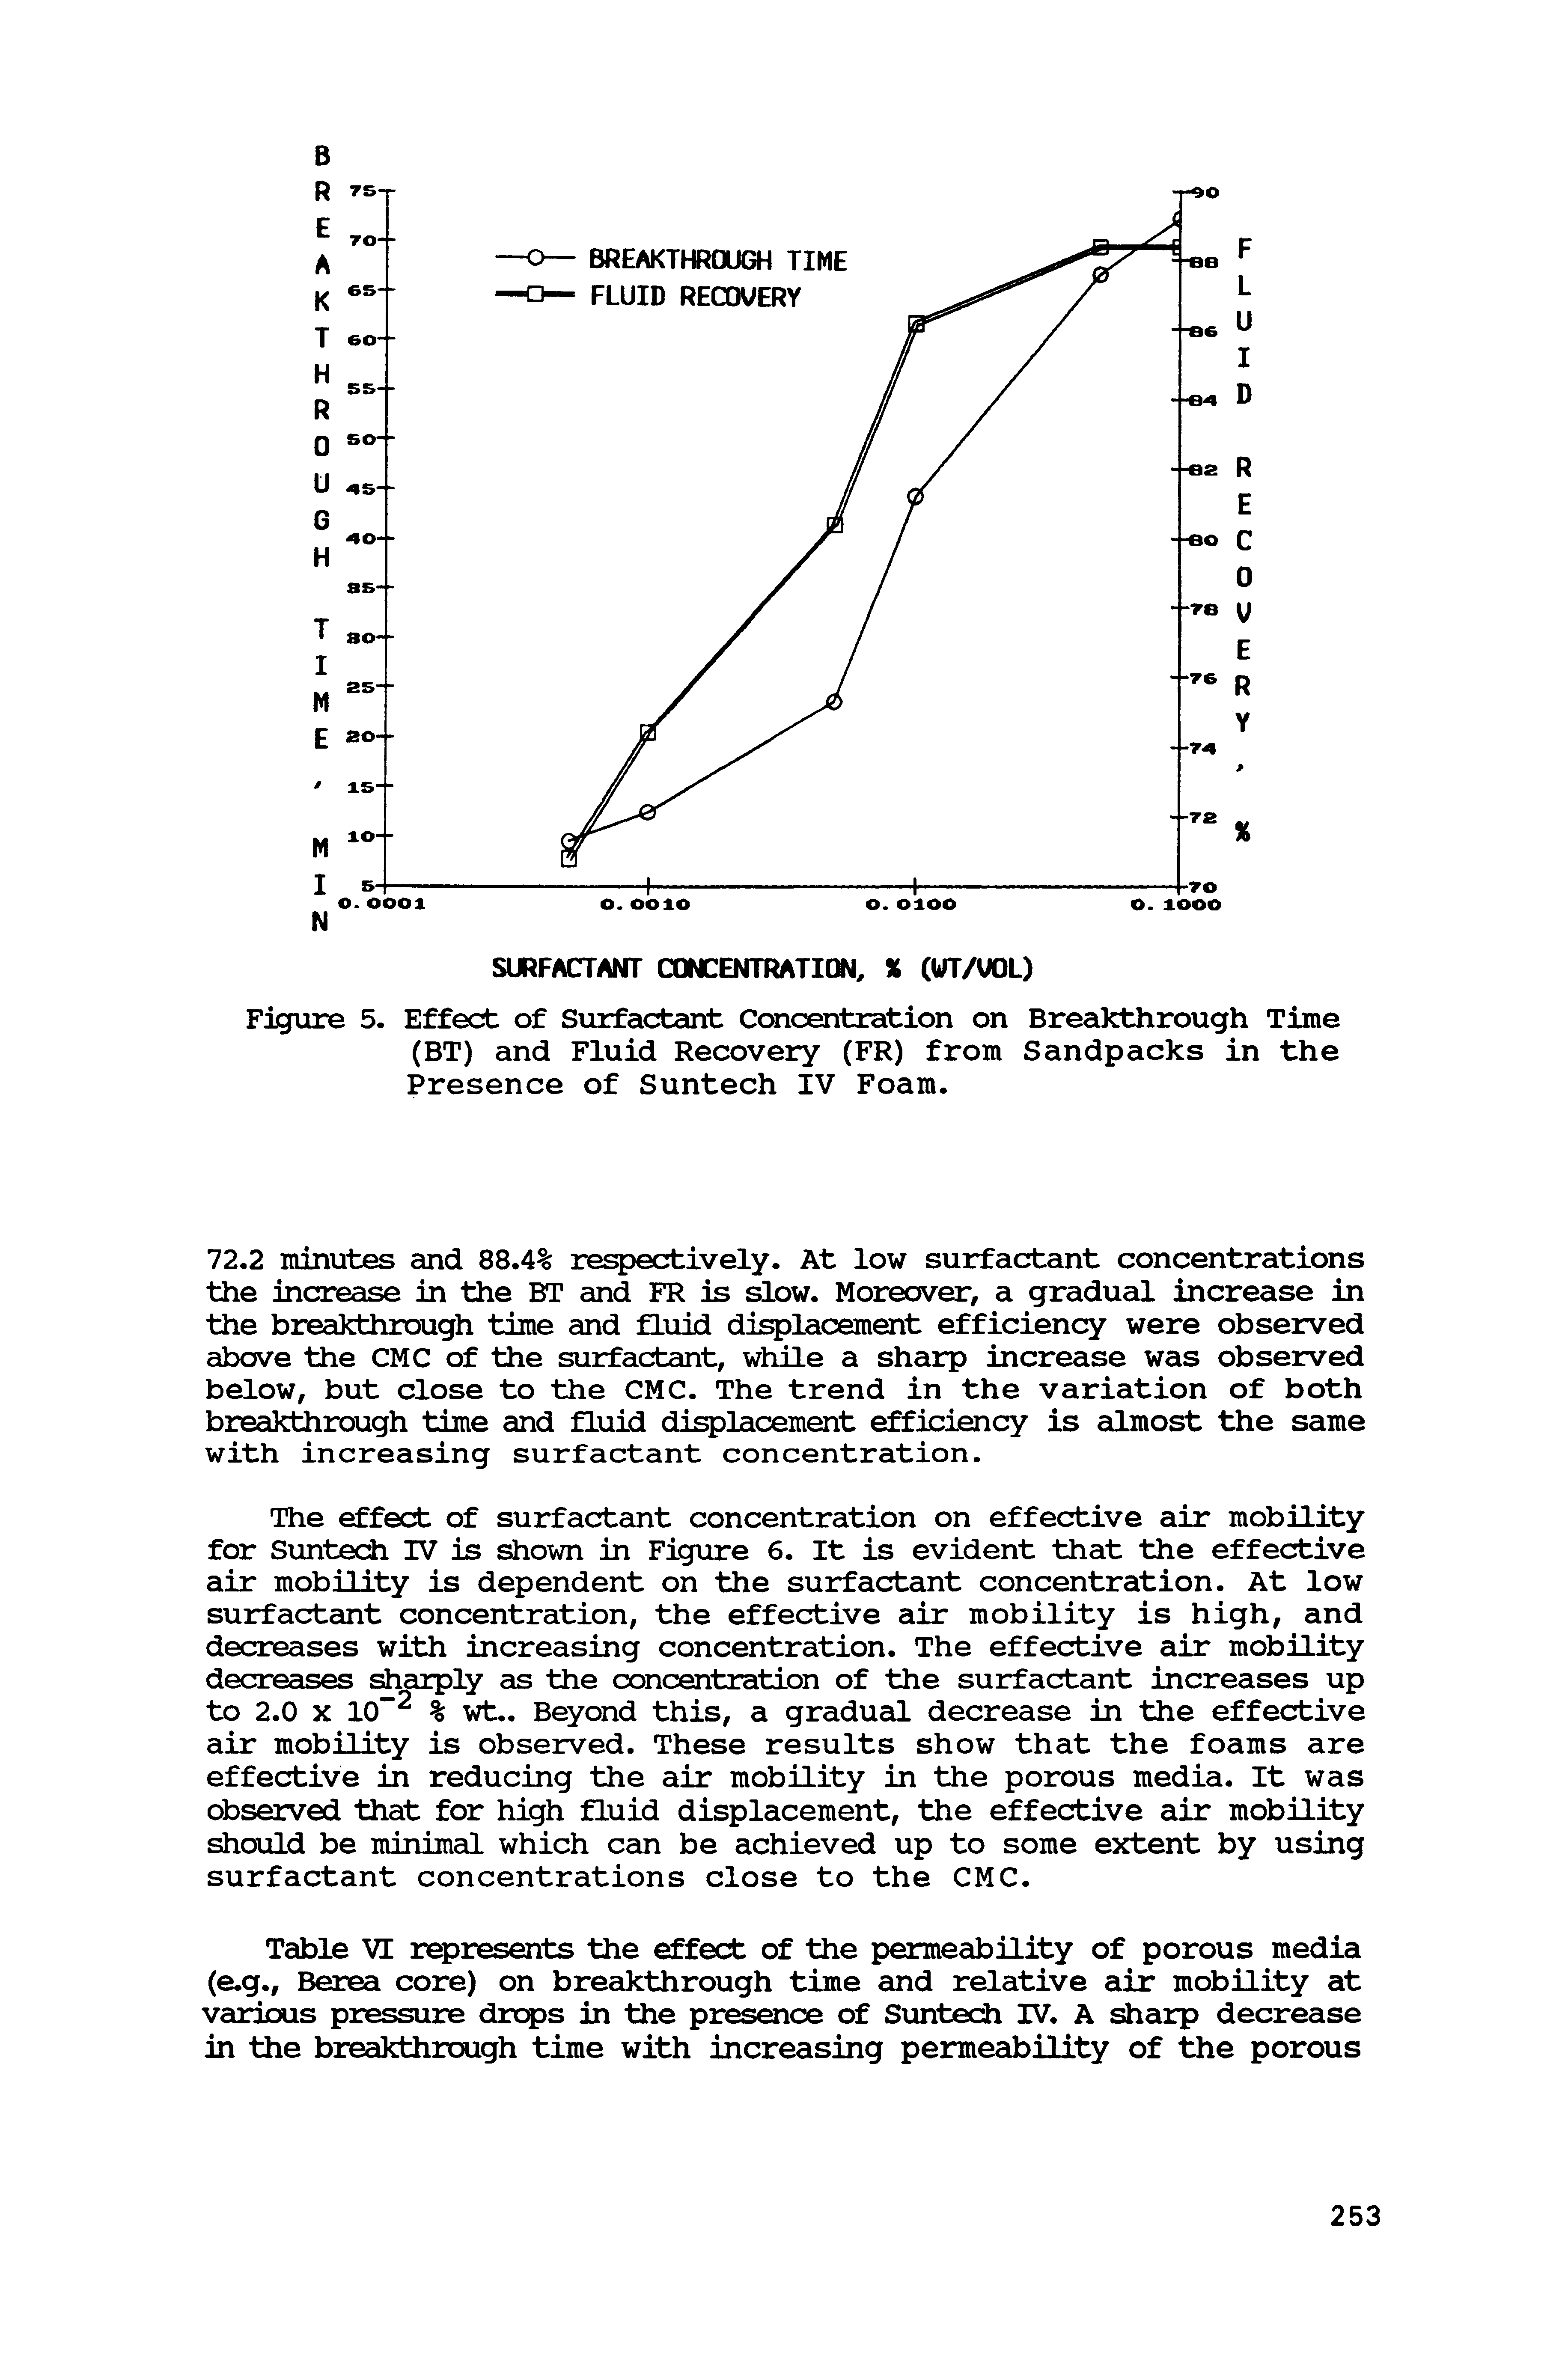 Figure 5. Effect of Surfactant Concentration on Breakthrough Time (BT) and Fluid Recovery (FR) from Sandpacks in the Presence of Suntech IV Foam.